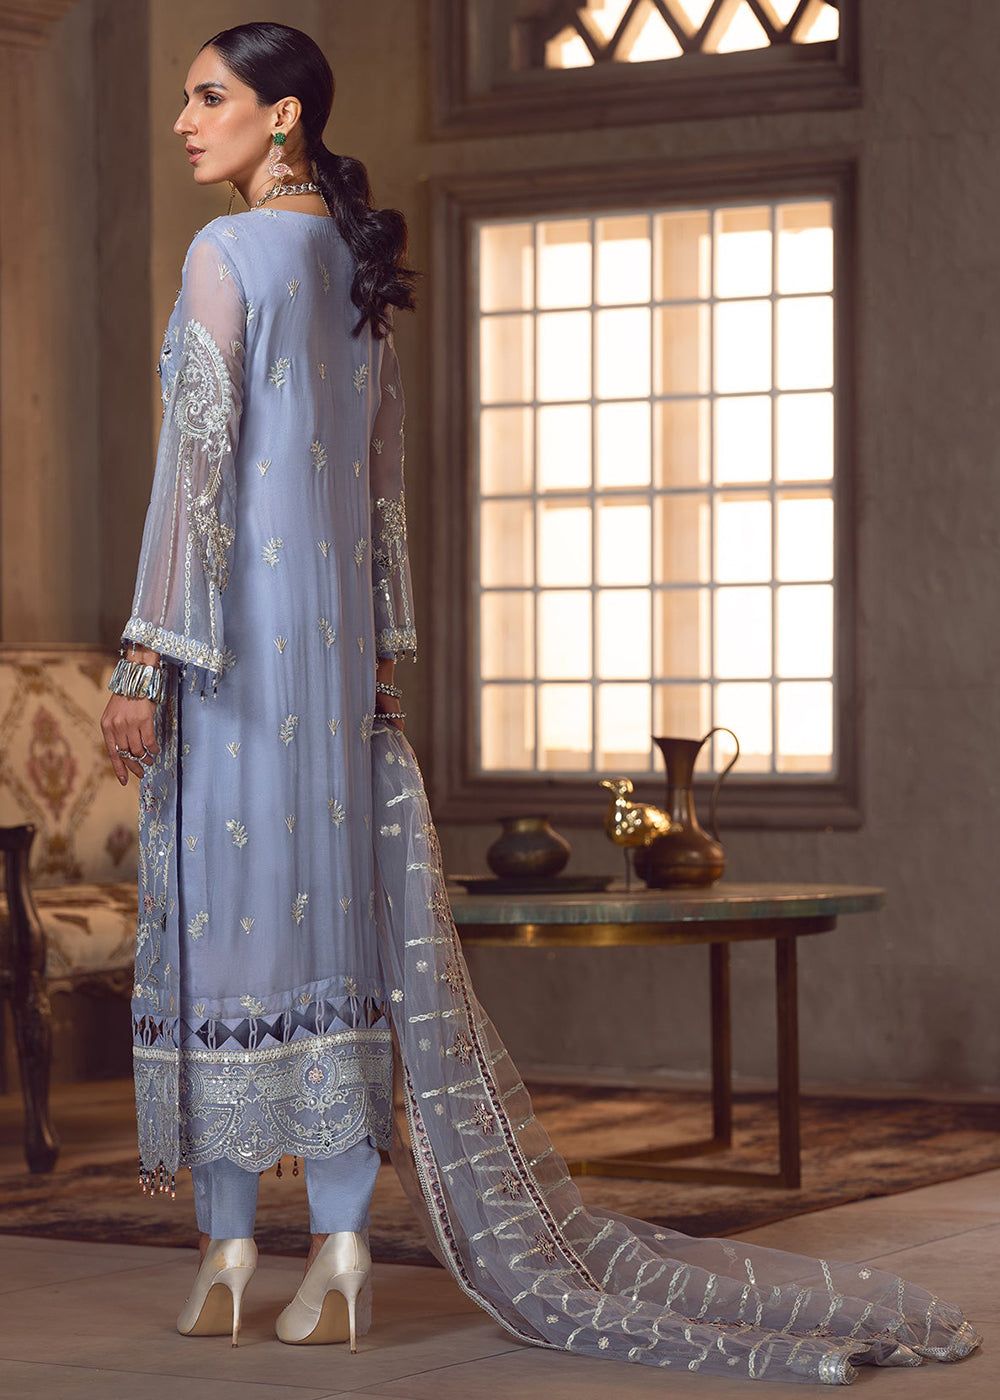 Buy Now Sky Blue Pakistani Suit | Emaan Adeel | Le Festa Formal Edit 7 | LF-707 Online in USA, UK, Canada & Worldwide at Empress Clothing.